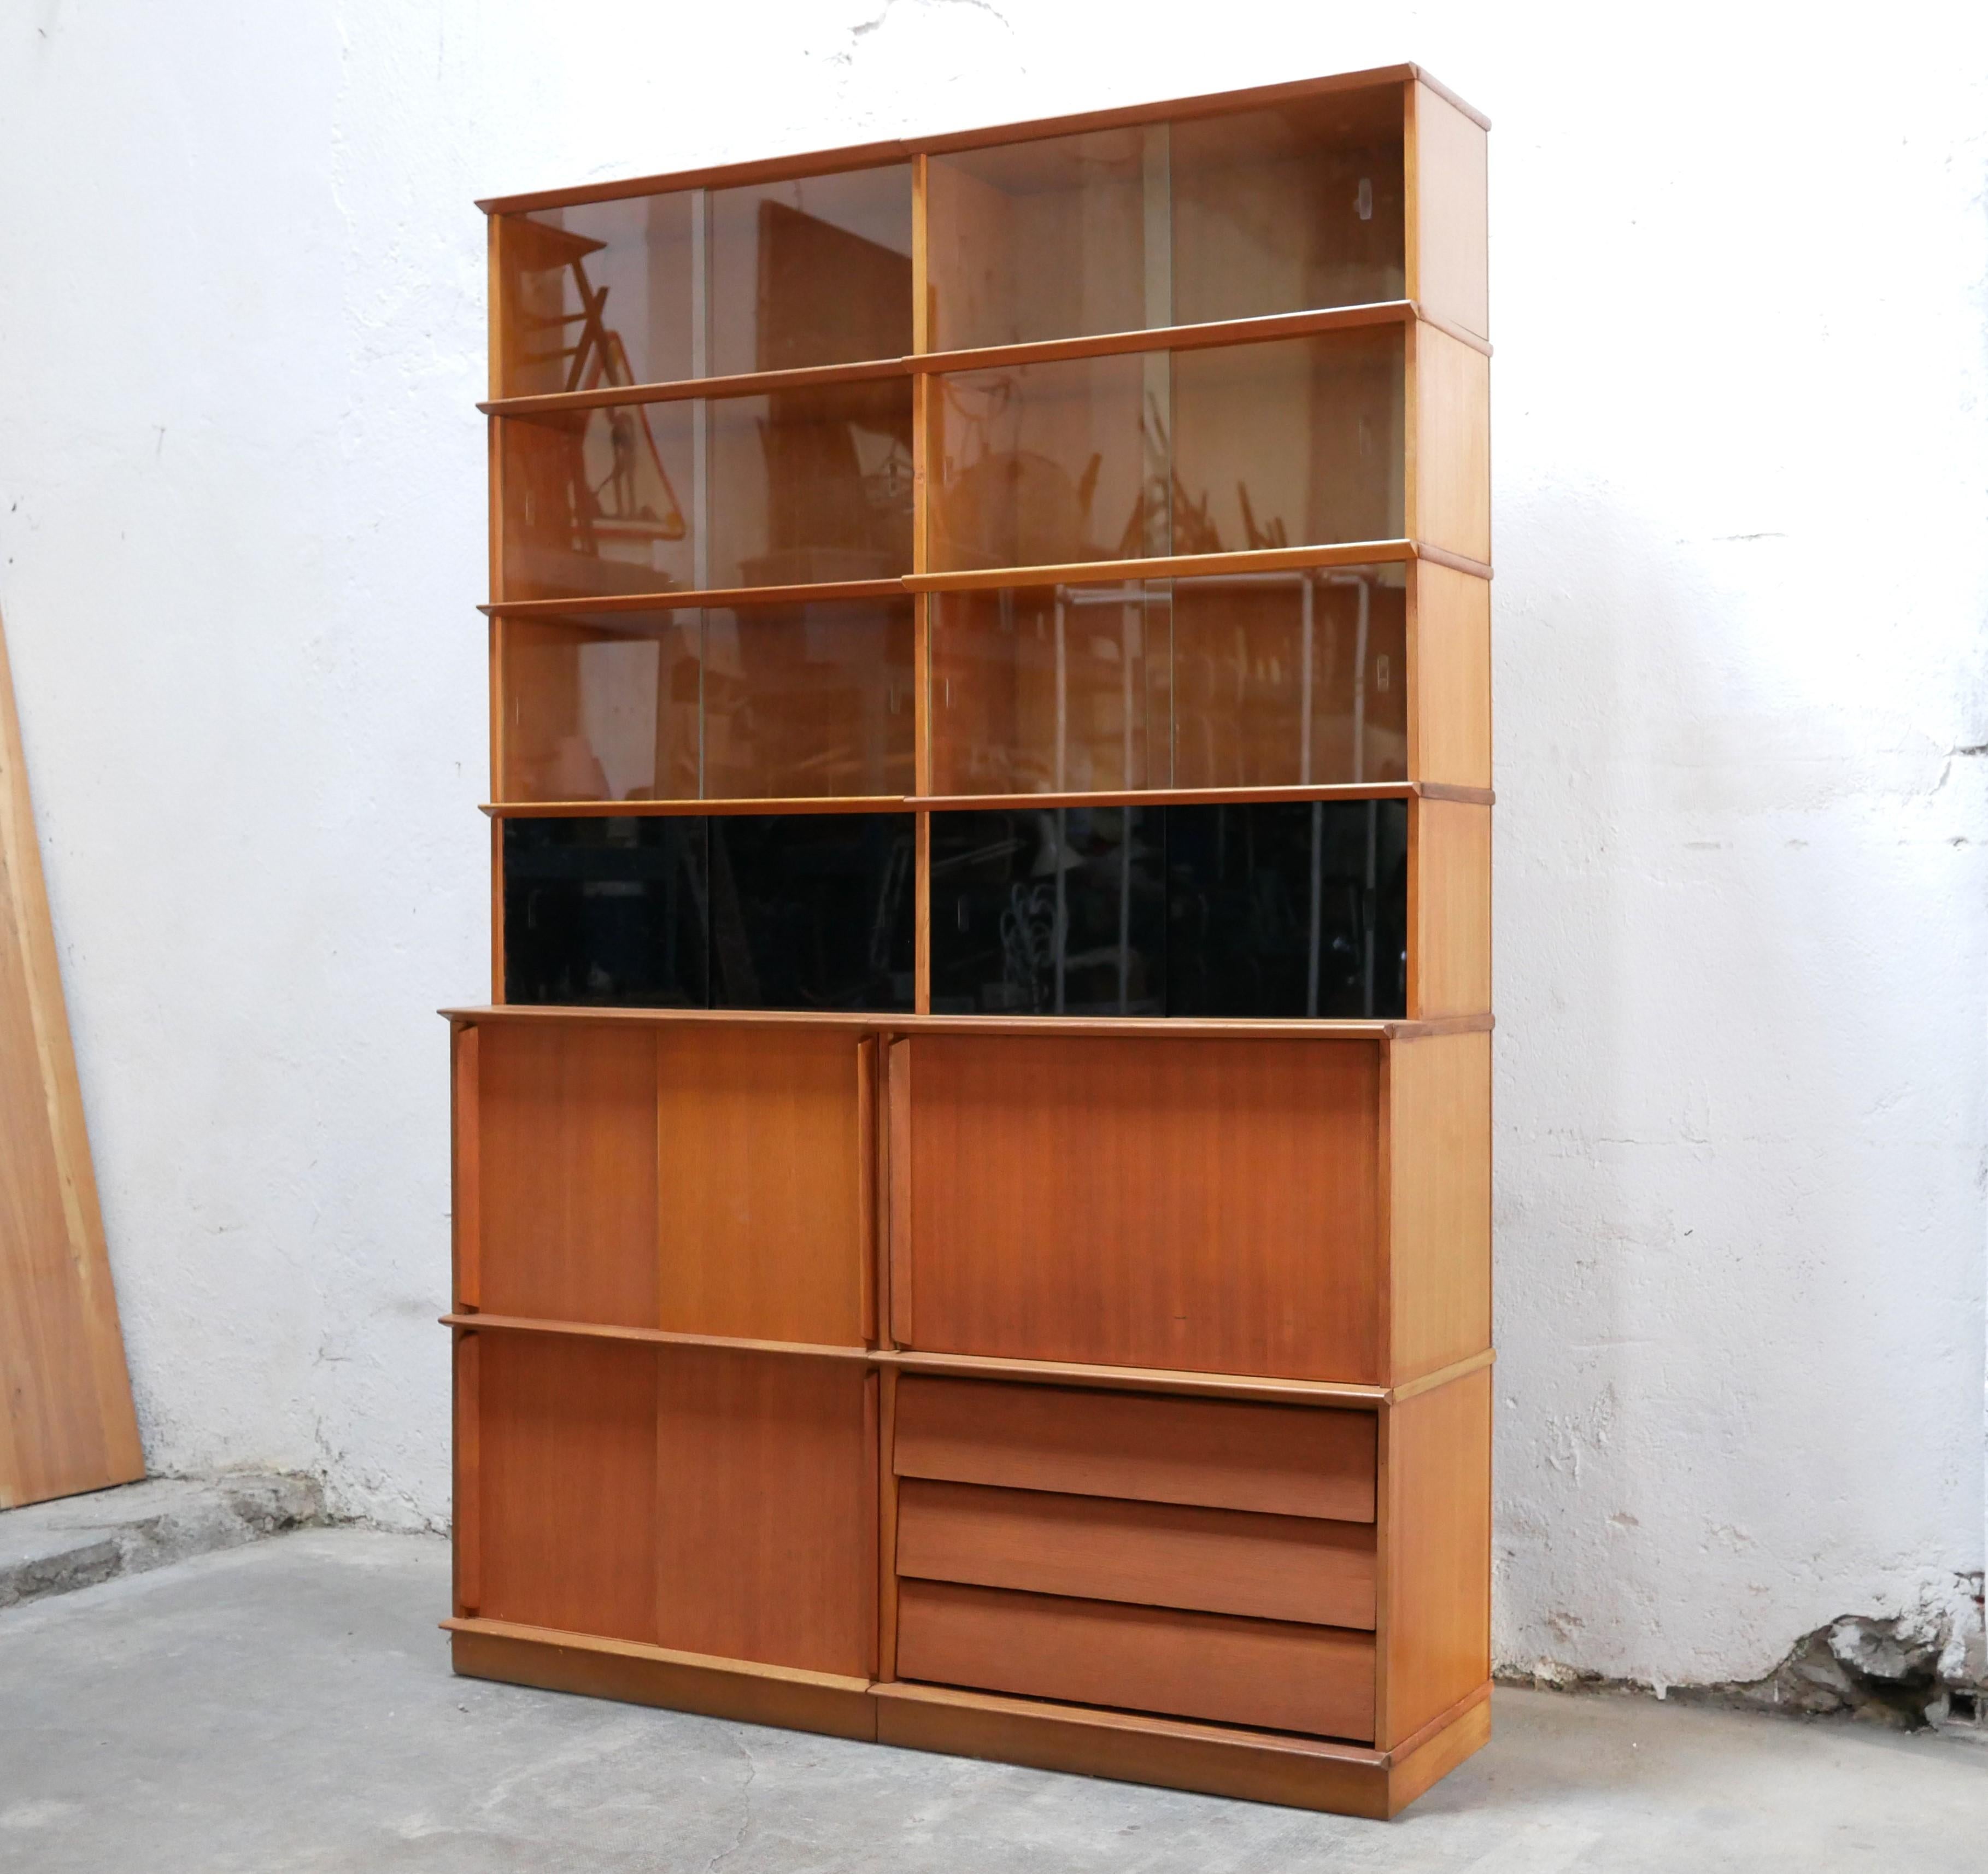 Showcase bookcase designed by designer Didier Rozaffy for Meubles Oscar in the 1950s.

Modular and fully removable system. For its ingenuity, this system was rewarded in 1954 during the 10th Milan Triennale, exhibition of Decorative Arts and Modern